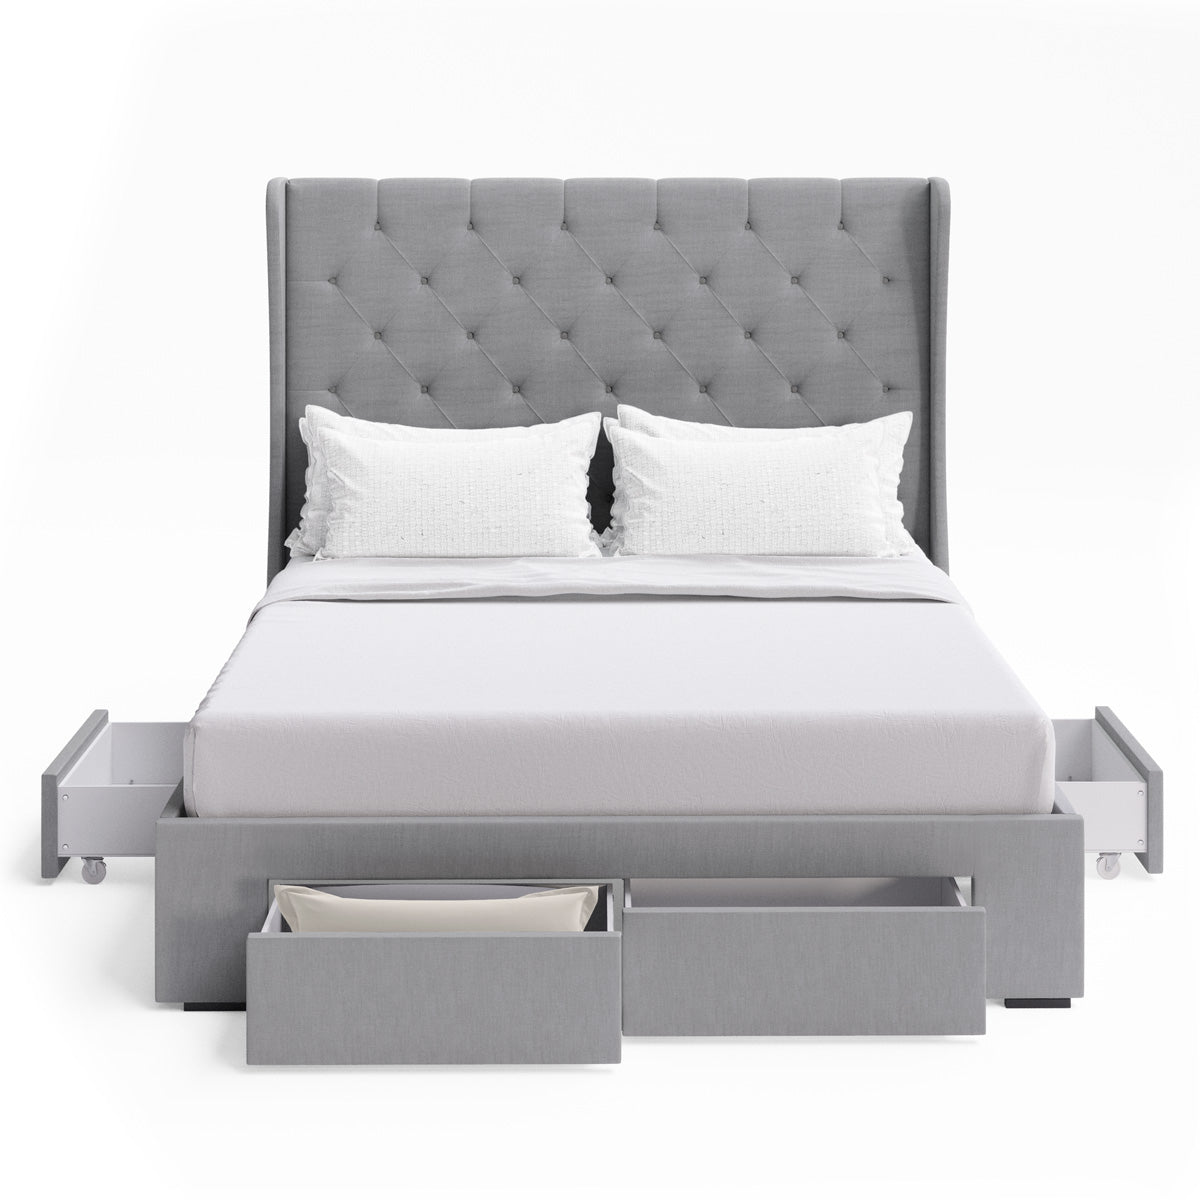 Windsor Winged Bed Frame with Four Storage Drawers (Grey Fabric)